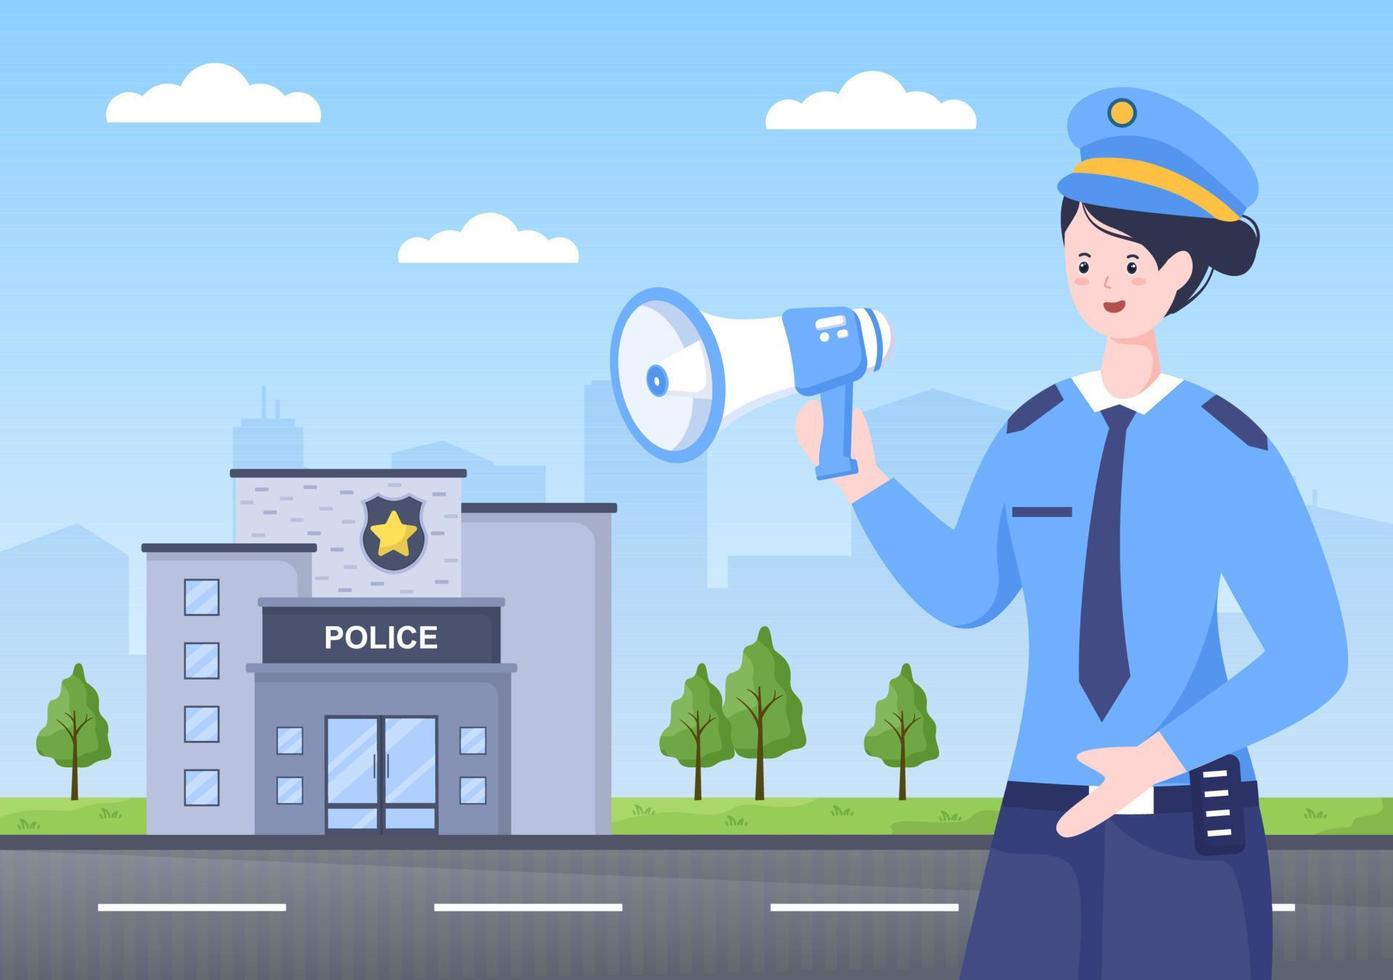 Police Station Department Building Vector Illustration with Policeman and Car on Flat Cartoon Style Background